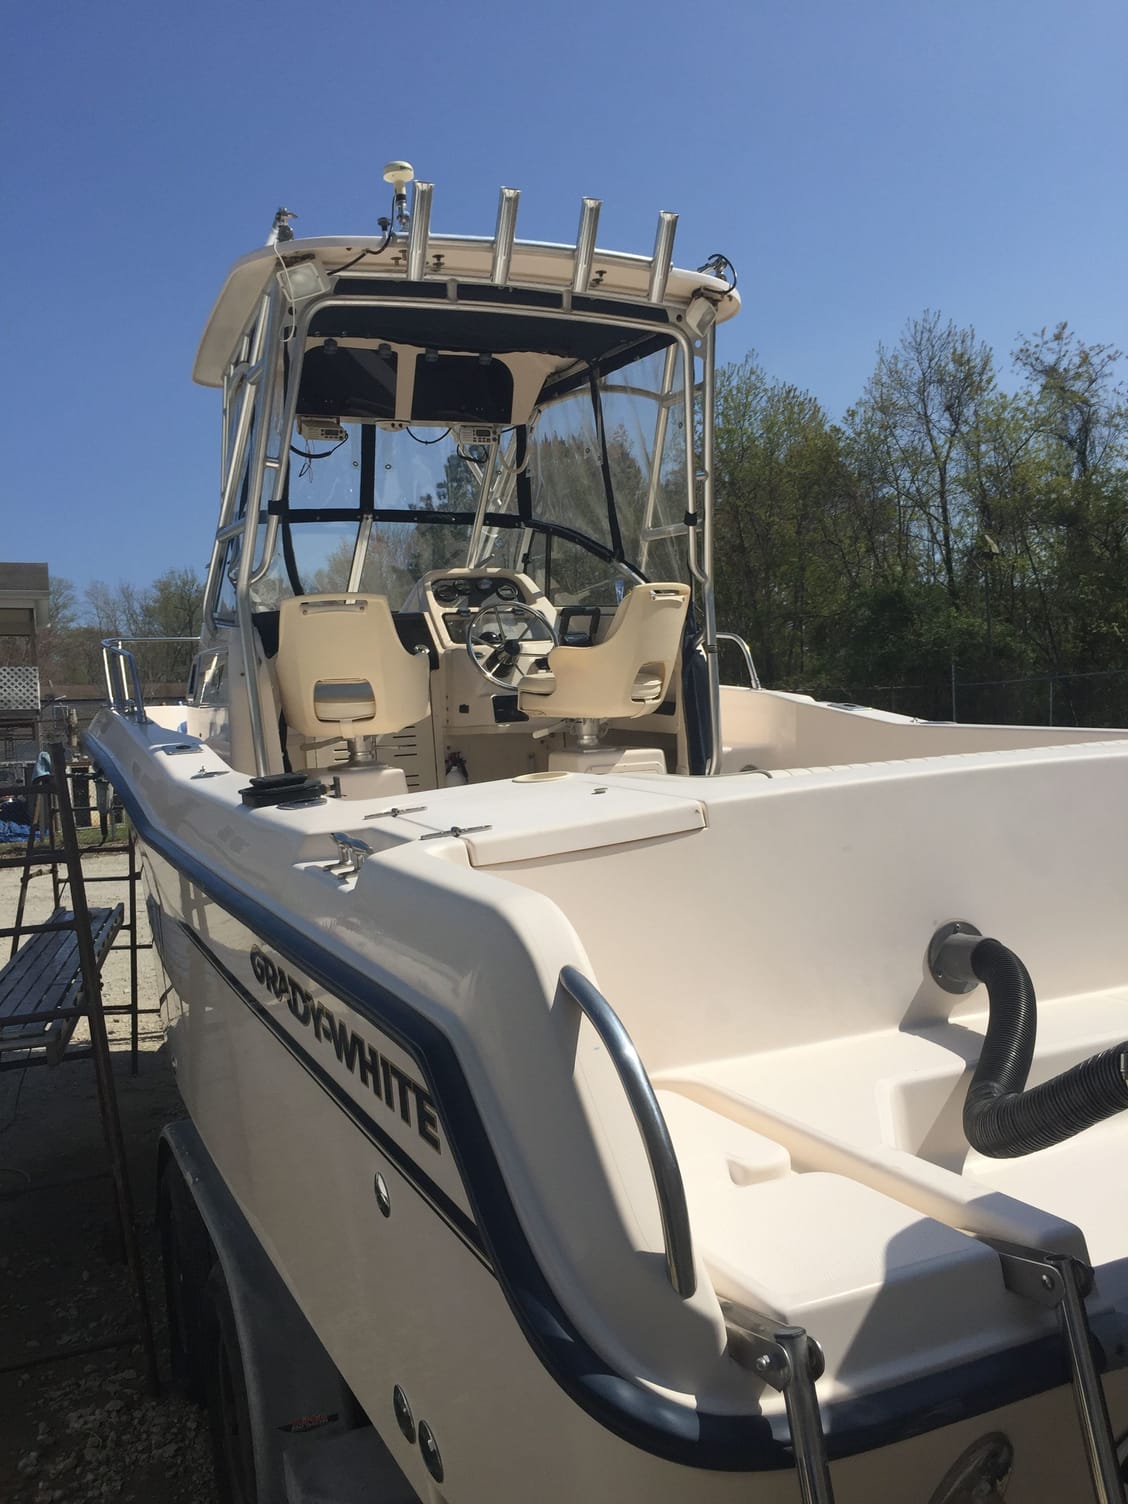 Need Input on Adding Rod Holders - The Hull Truth - Boating and